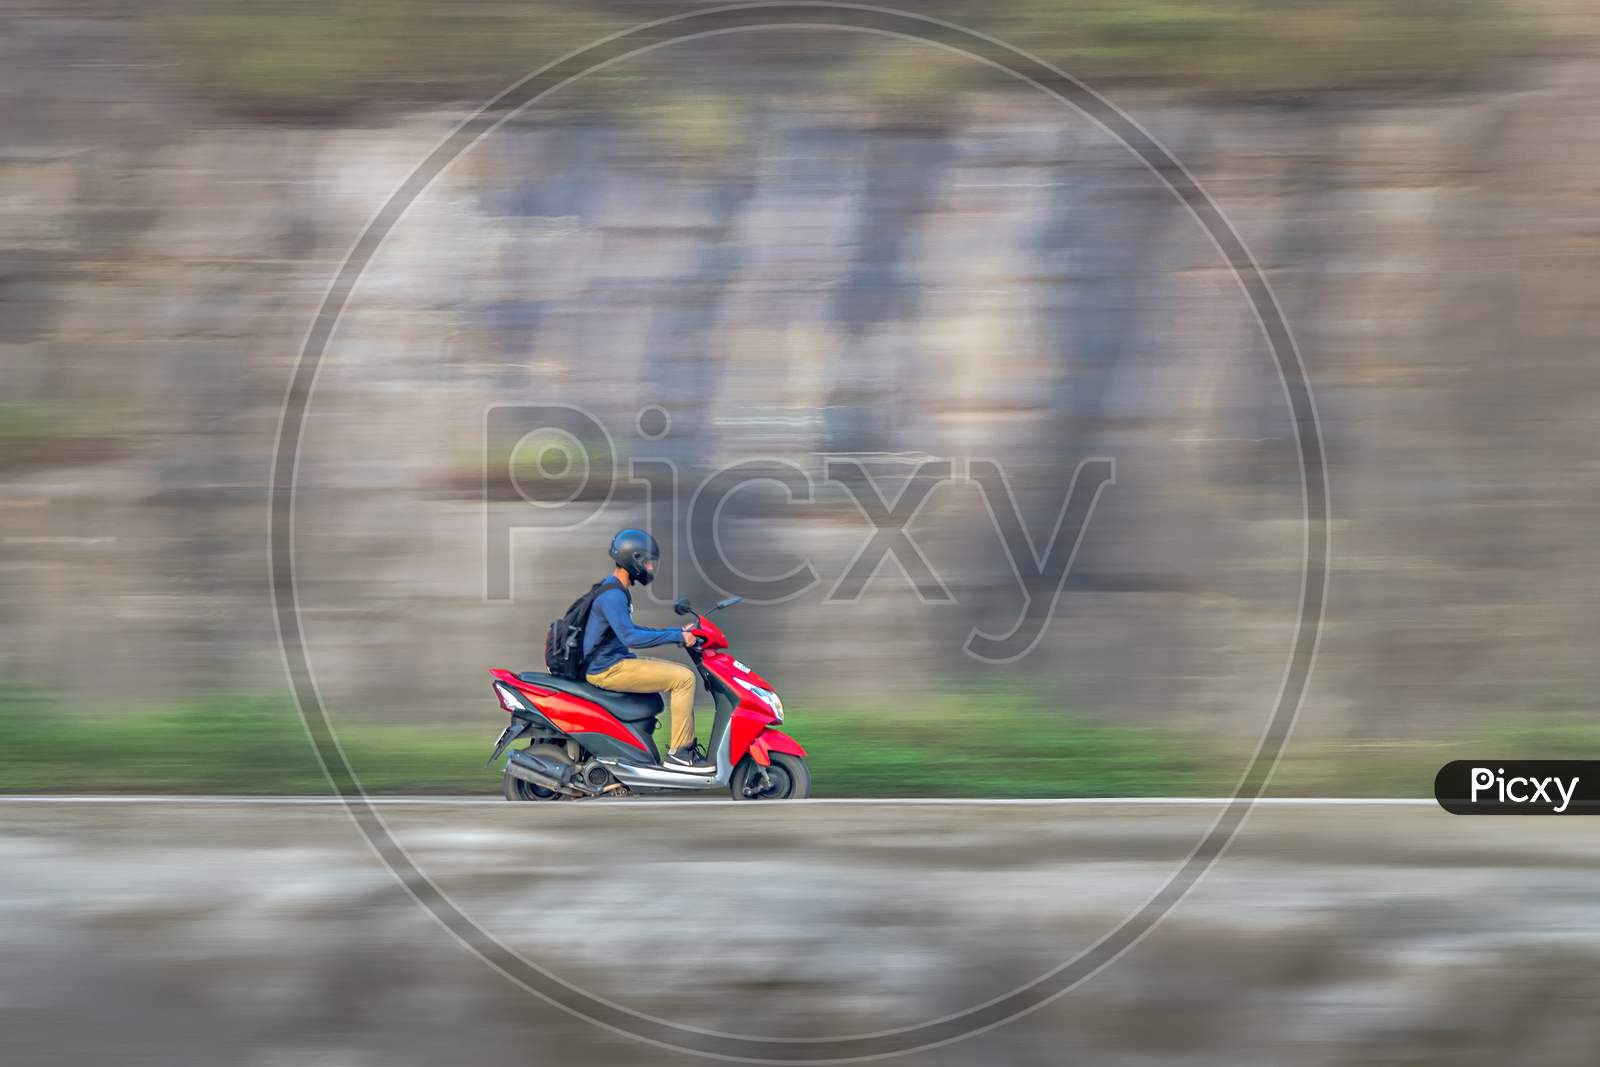 Motion Blur Image Of A Rider Wearing Helmet For Safety, Riding Uphill On A Red Two Wheeler Moped.